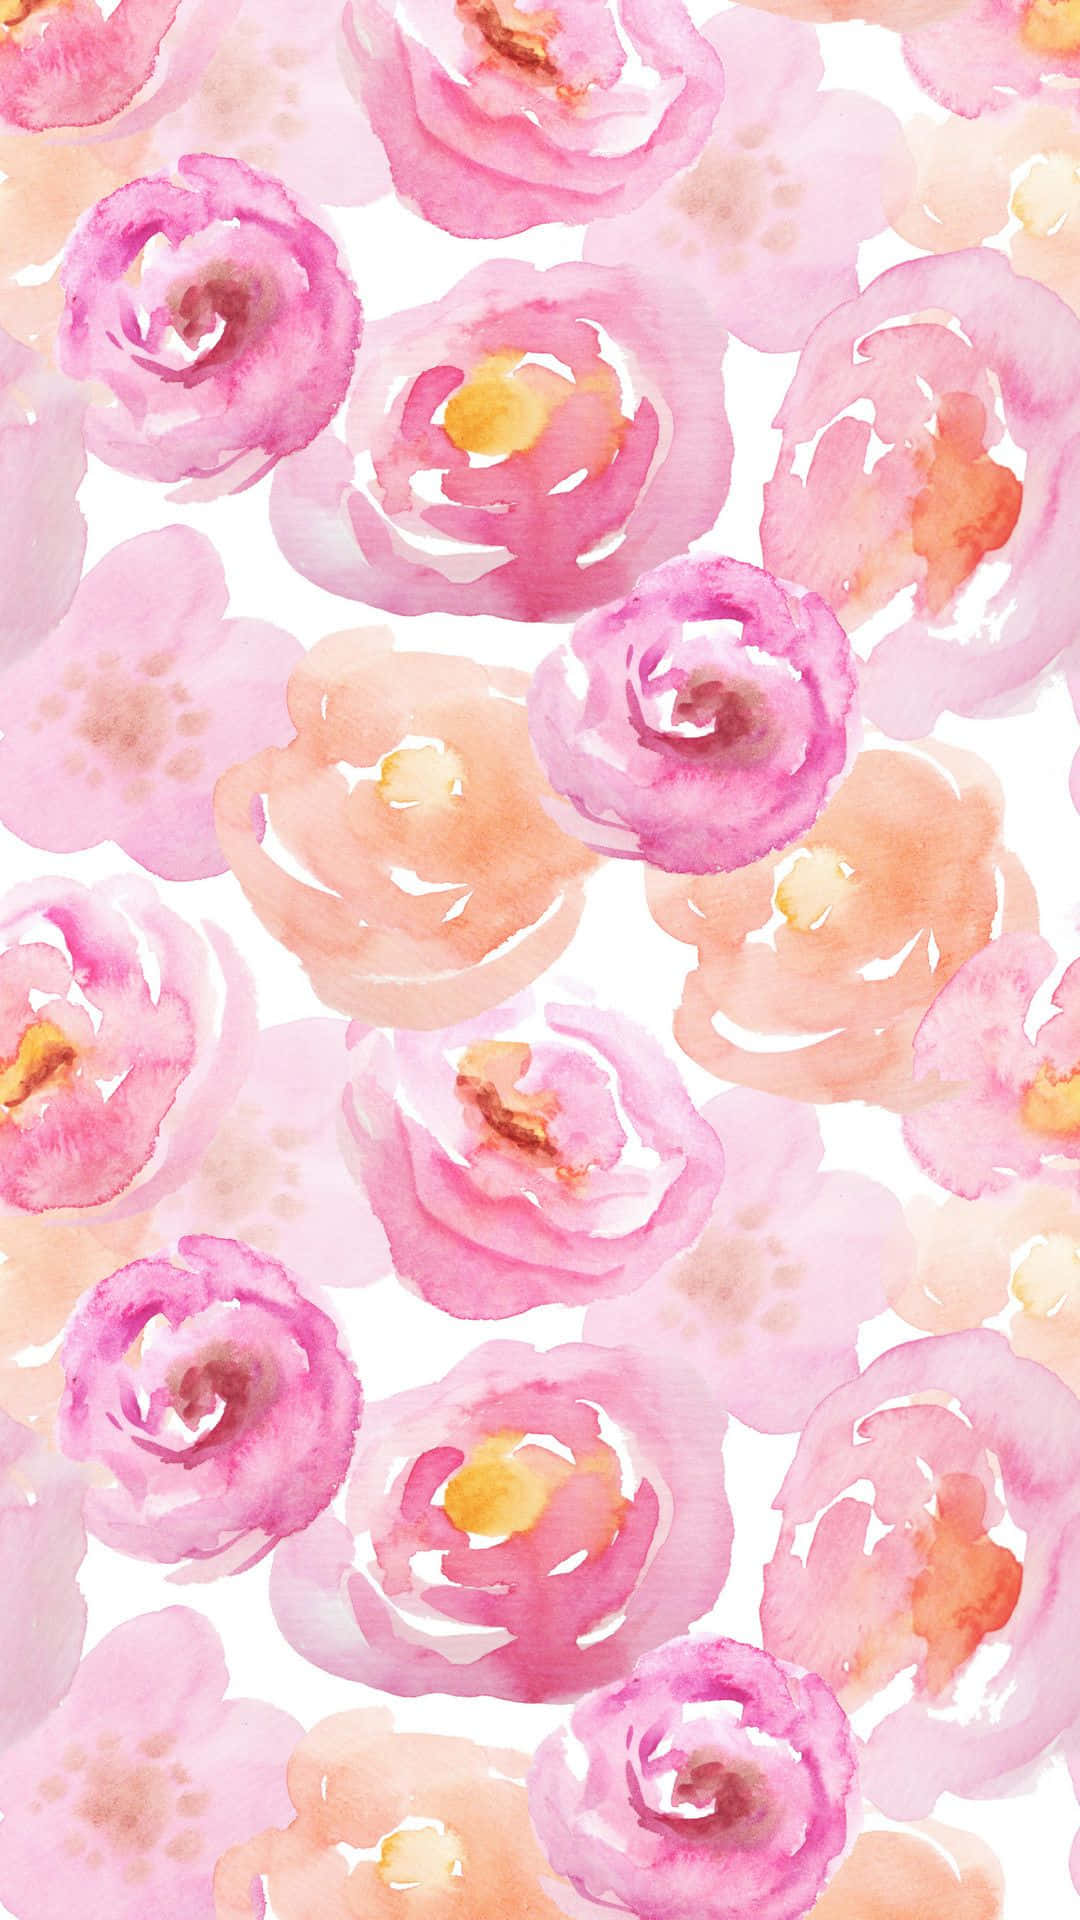 A beautiful watercolor flower background